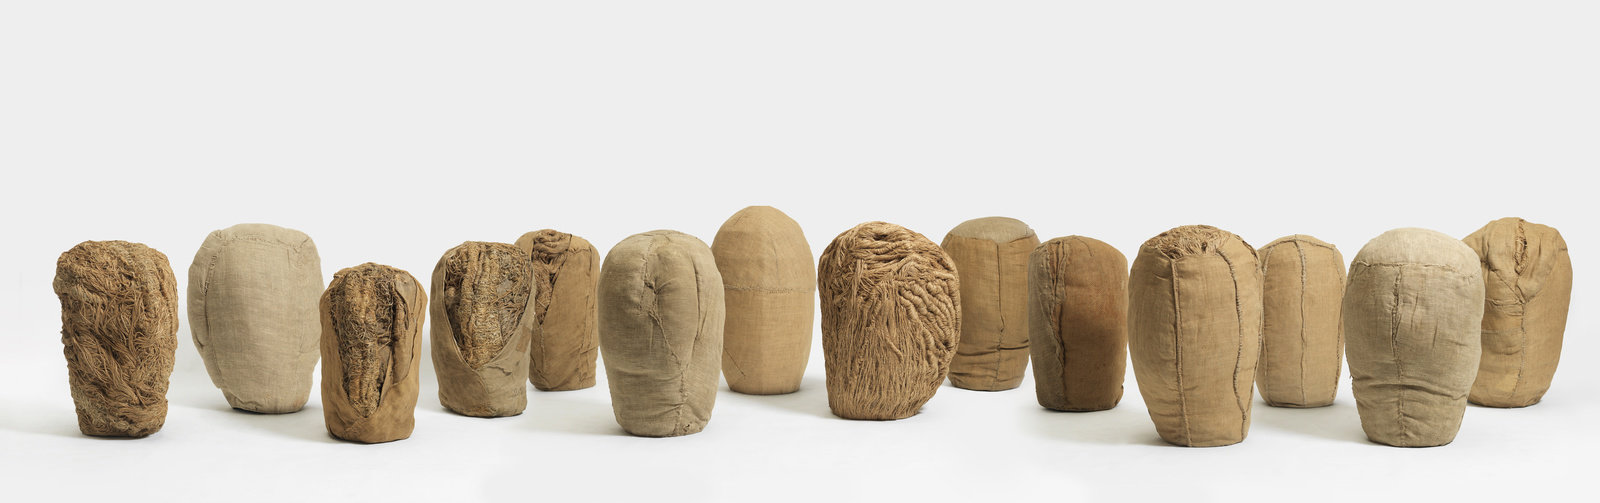 Abakanowicz, heads (14 pieces), 1973 ­75, burlap and hemp rope, non 30 966, by grubb